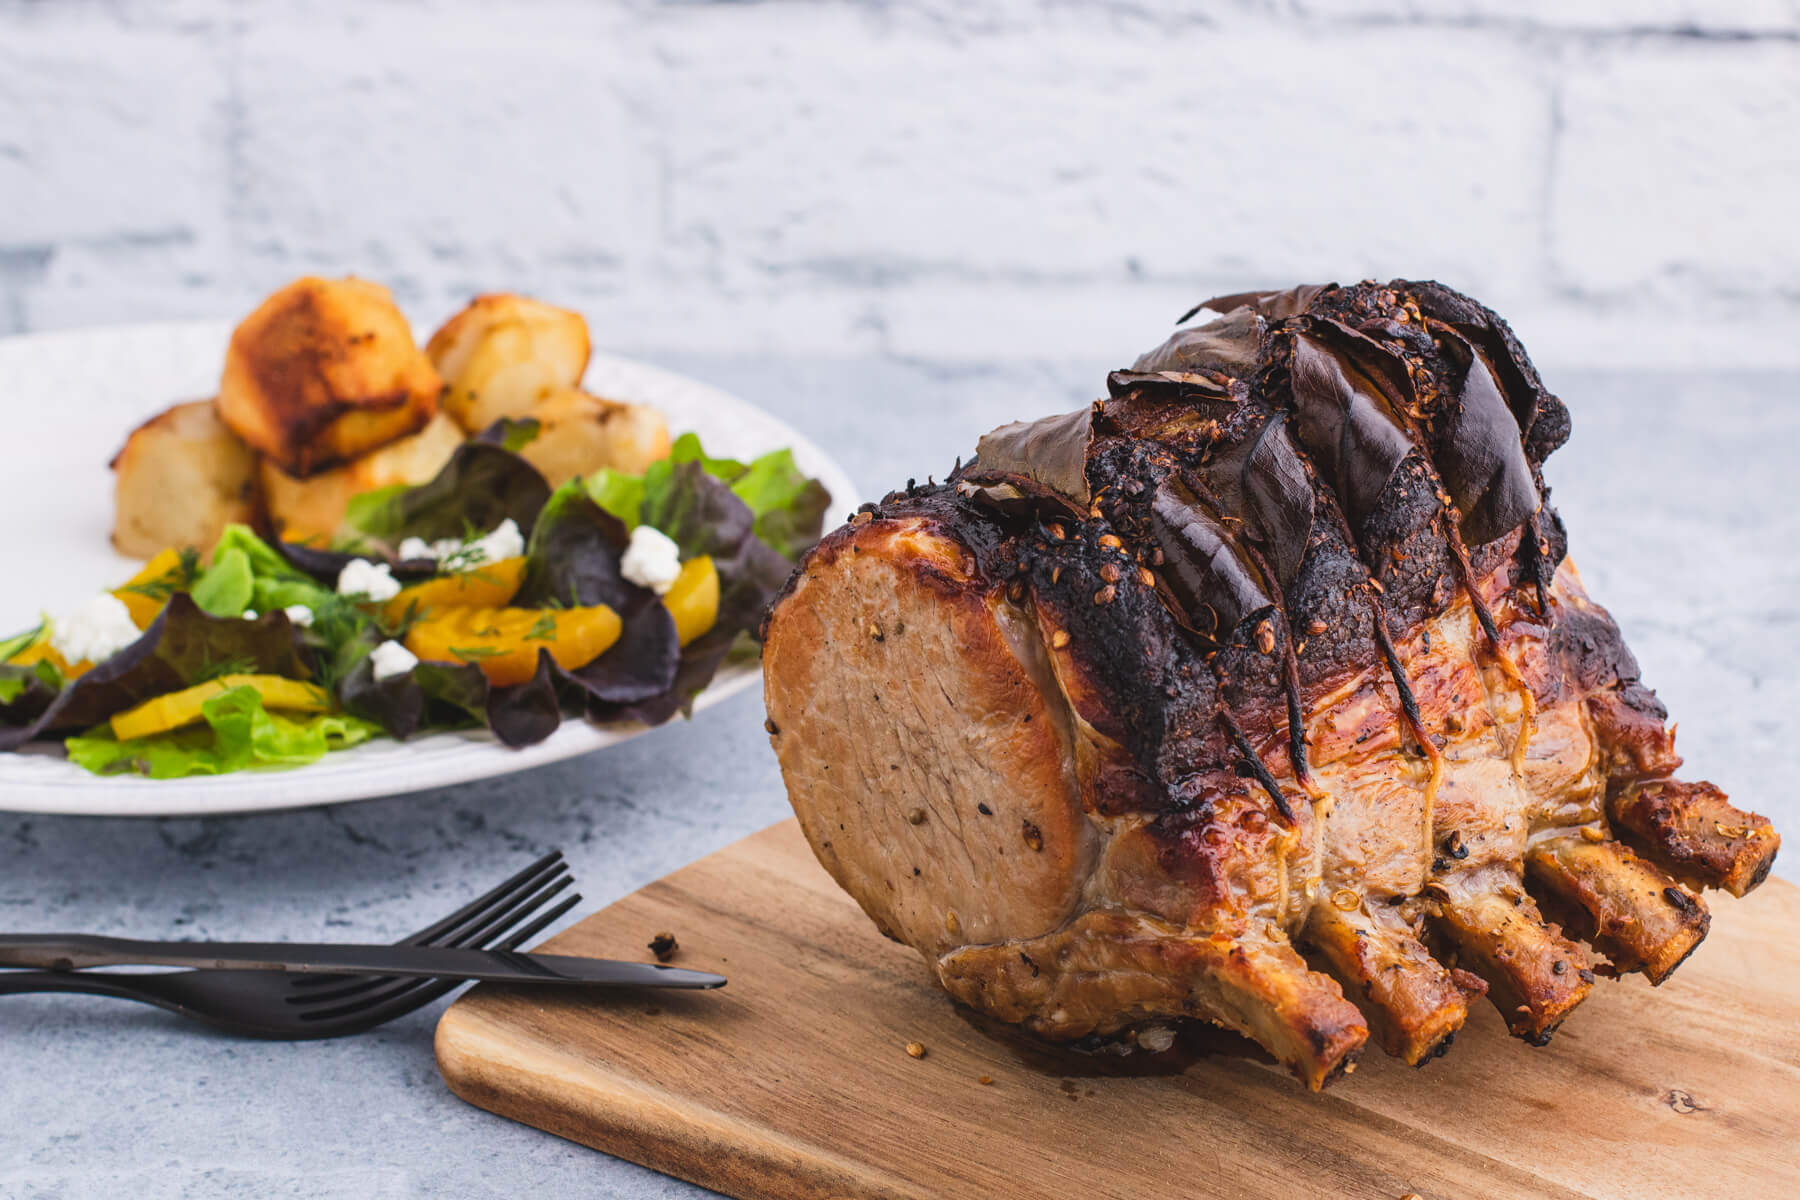 A whole roasted pork rib sits beside a dinner plate full of sliced pork, potatoes, and salad.